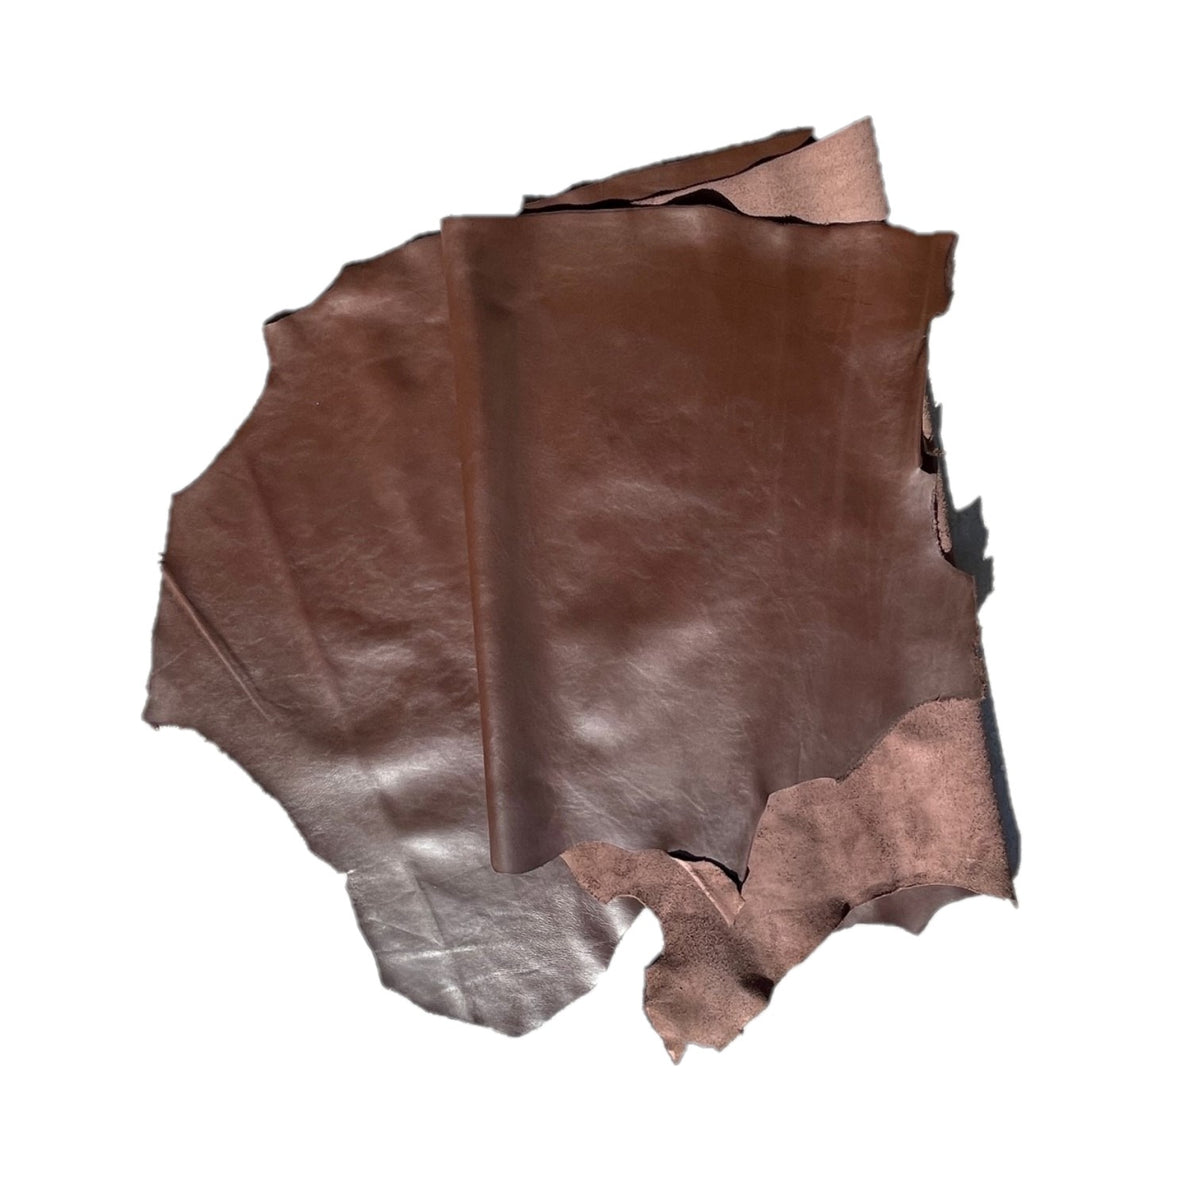 Olympia Cow Side | Chocolate | 1.5 mm | 21 sq.ft | From $260 ea.